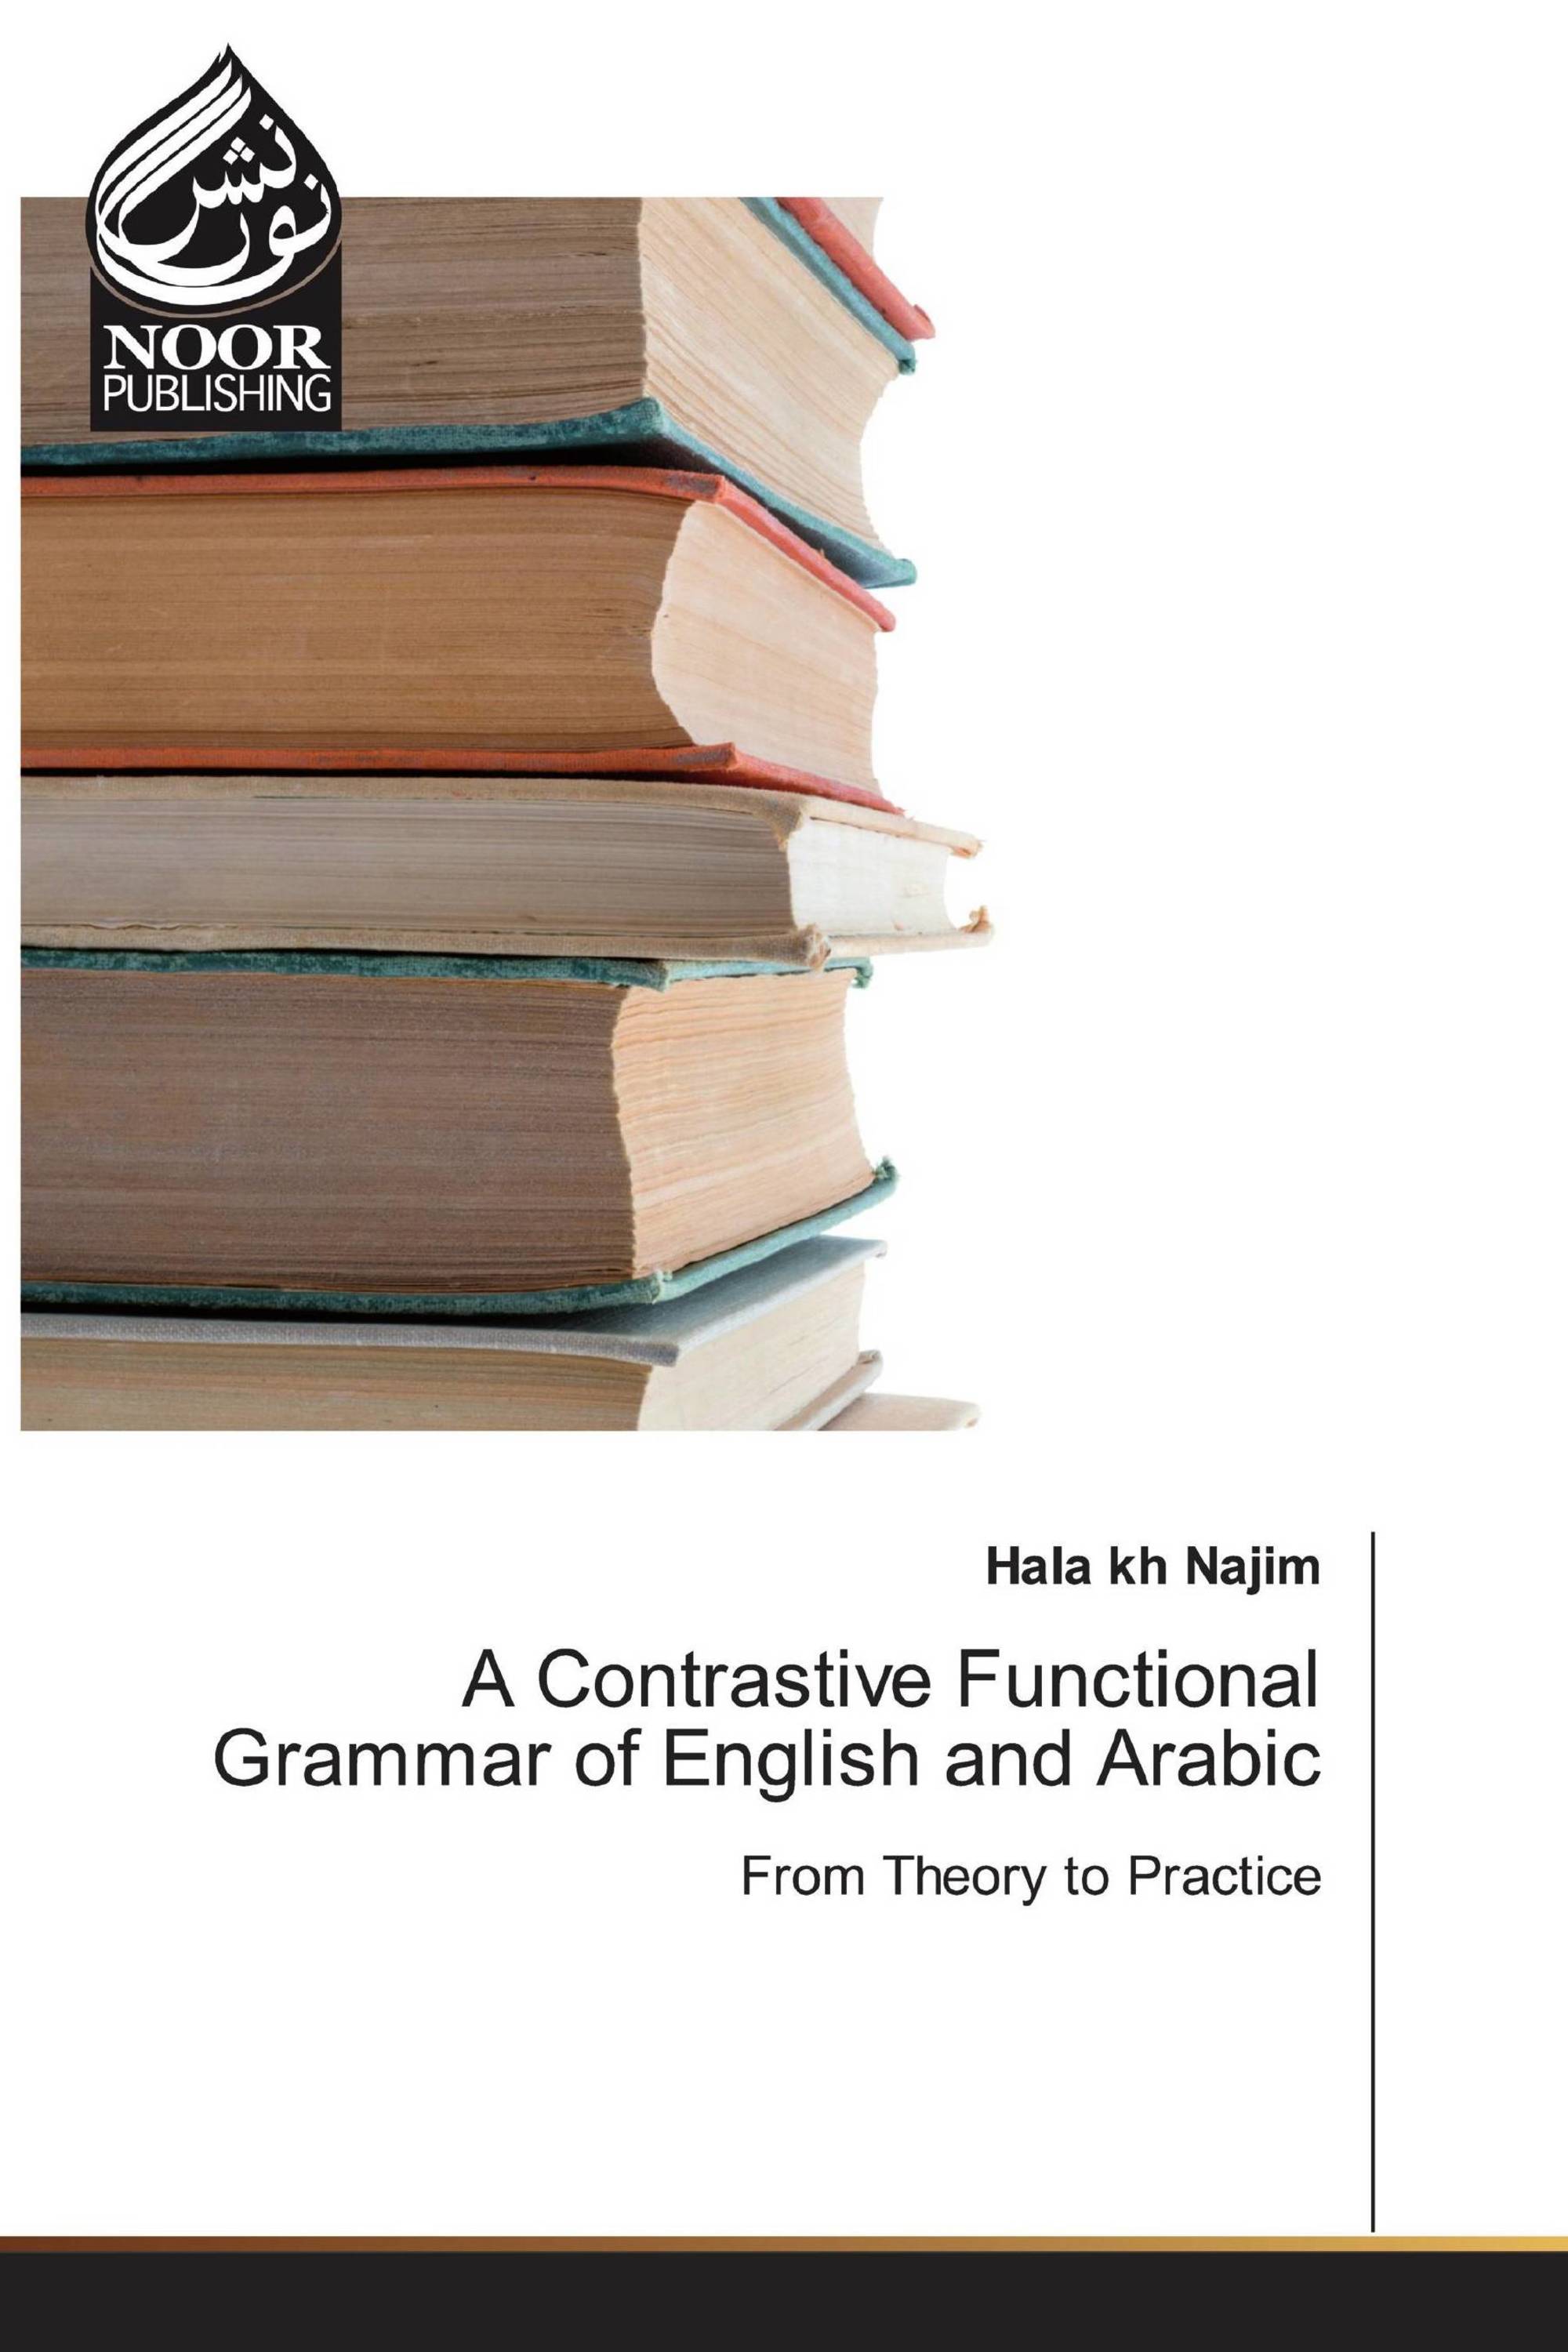 A Contrastive Functional Grammar of English and Arabic